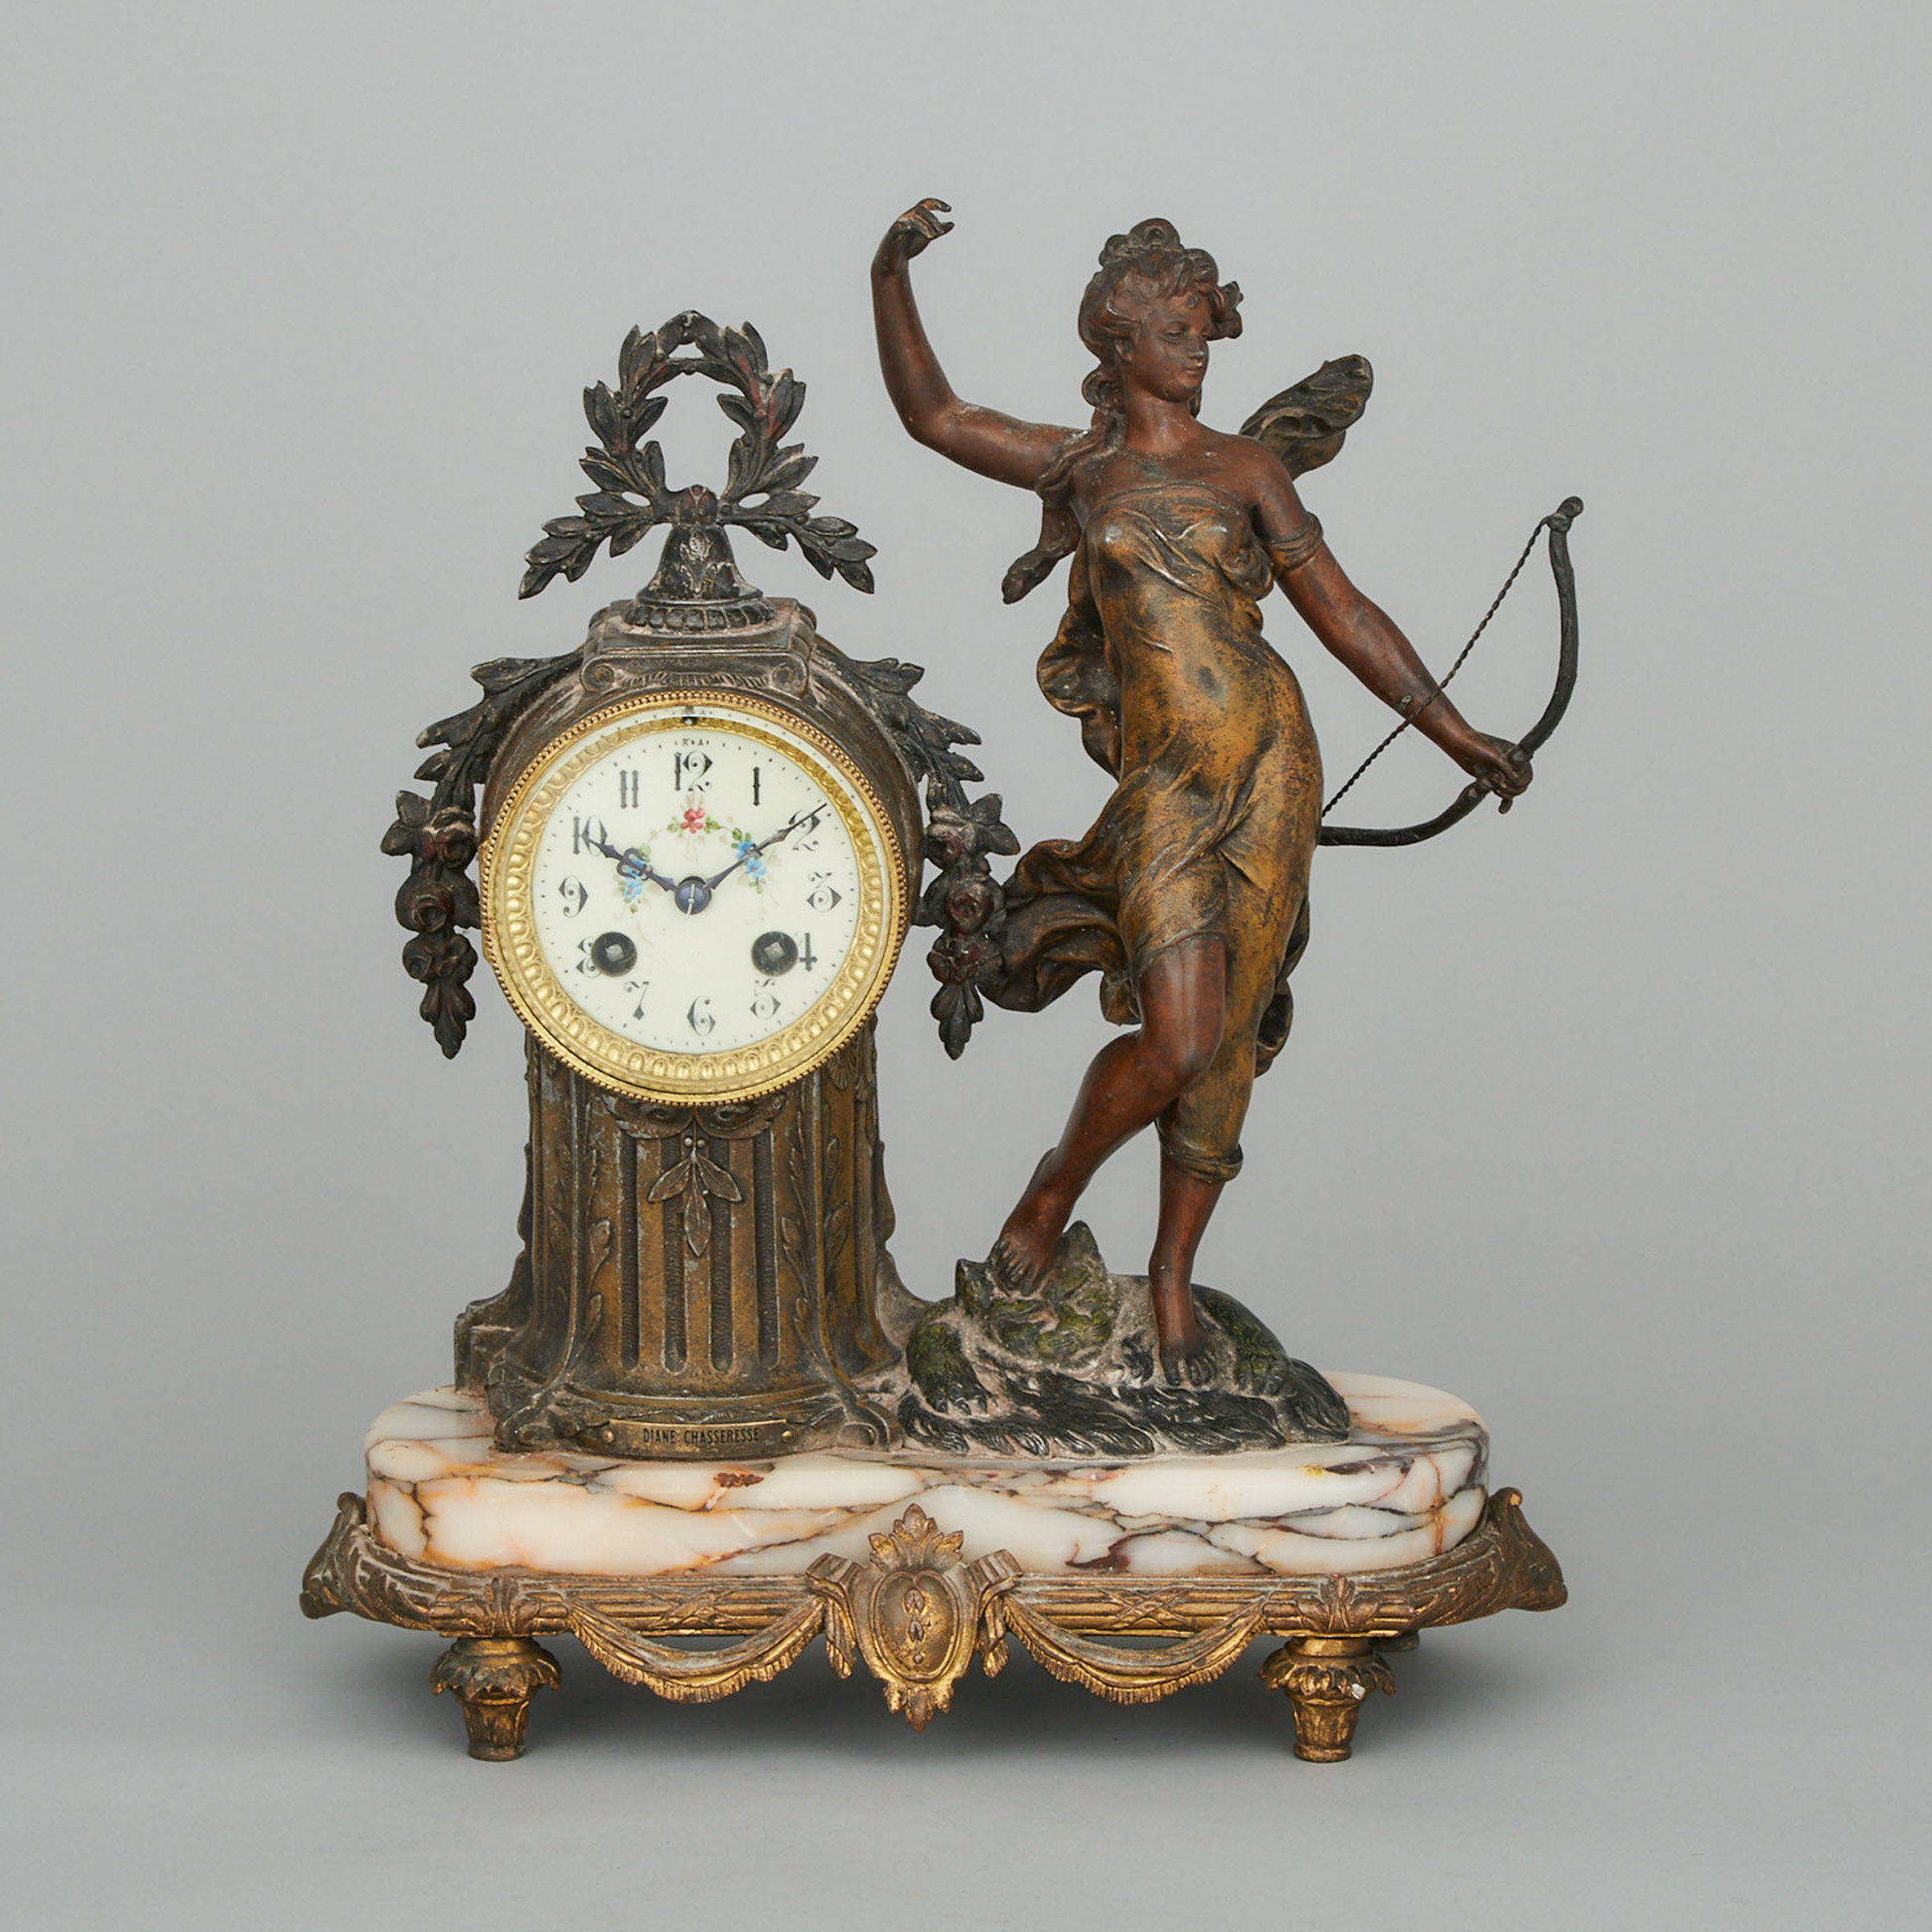 French Patinated White Metal Figural Mantle Clock, 19th/early 20th century